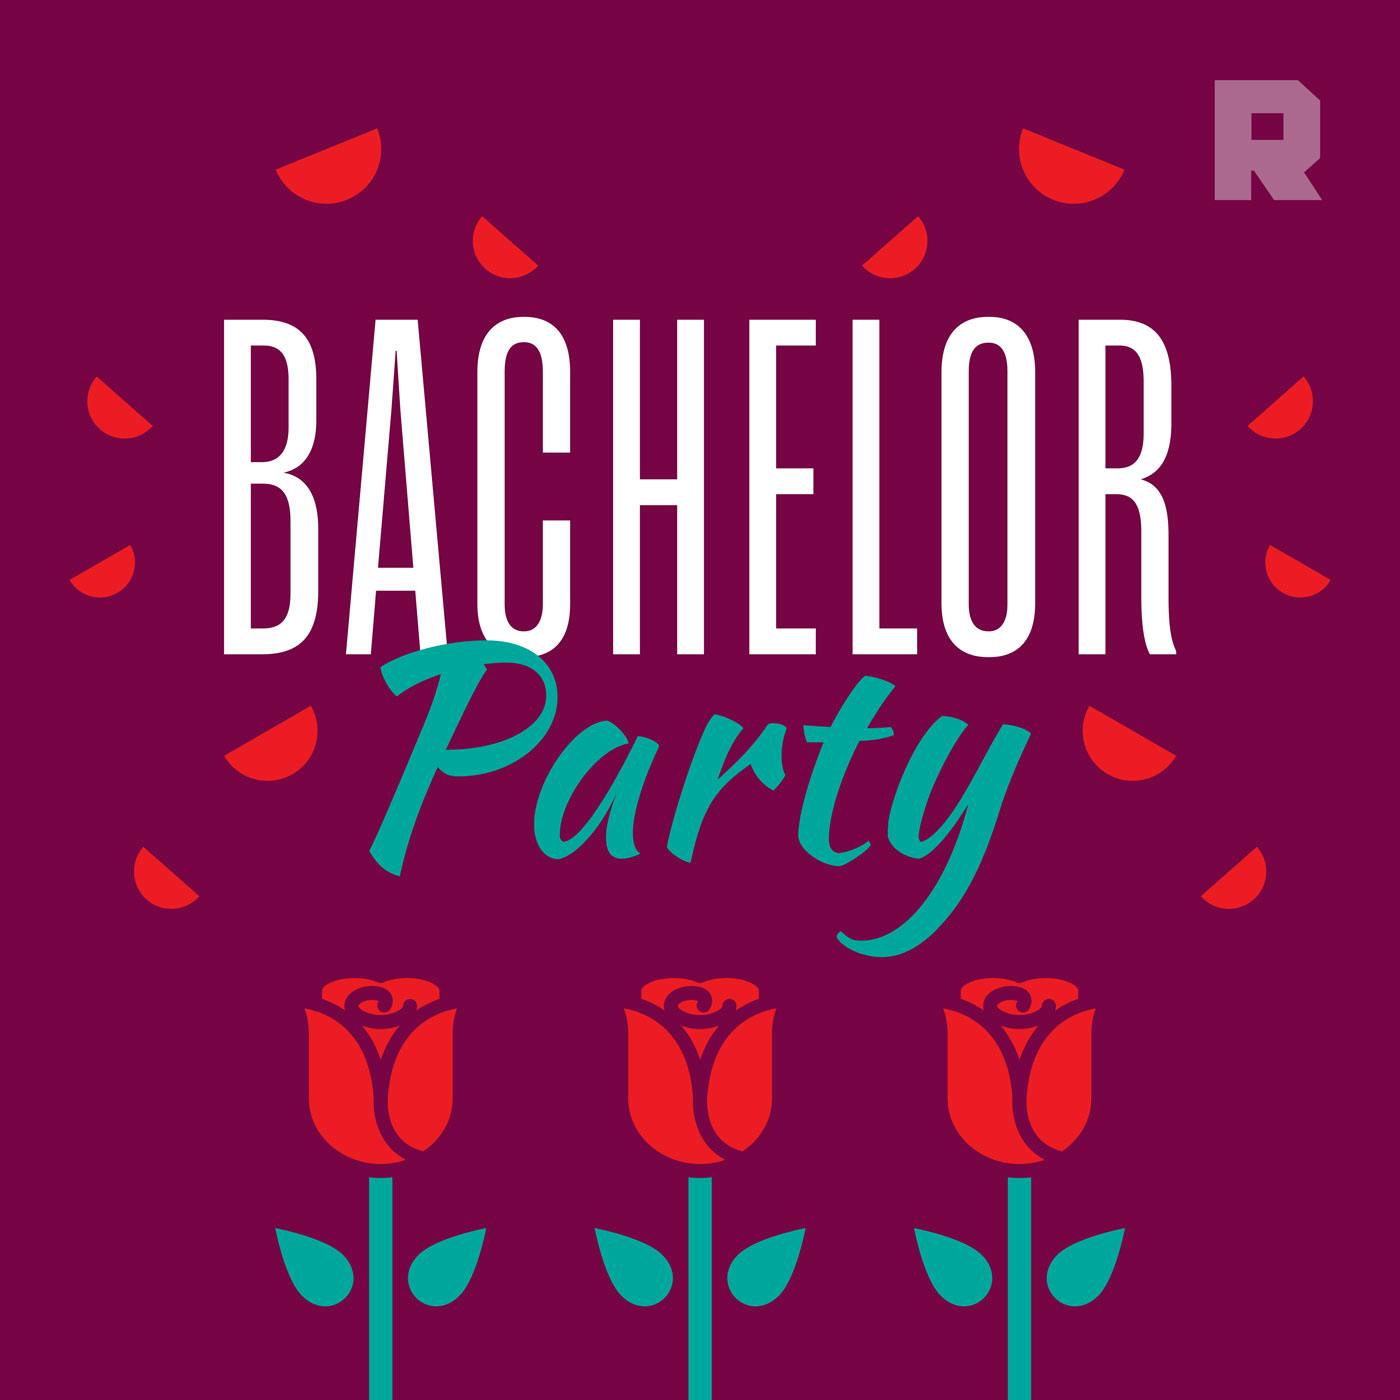 Lori Krebs on 'Bachelor' Clientele, Representation, and the Evolution of the Influencer